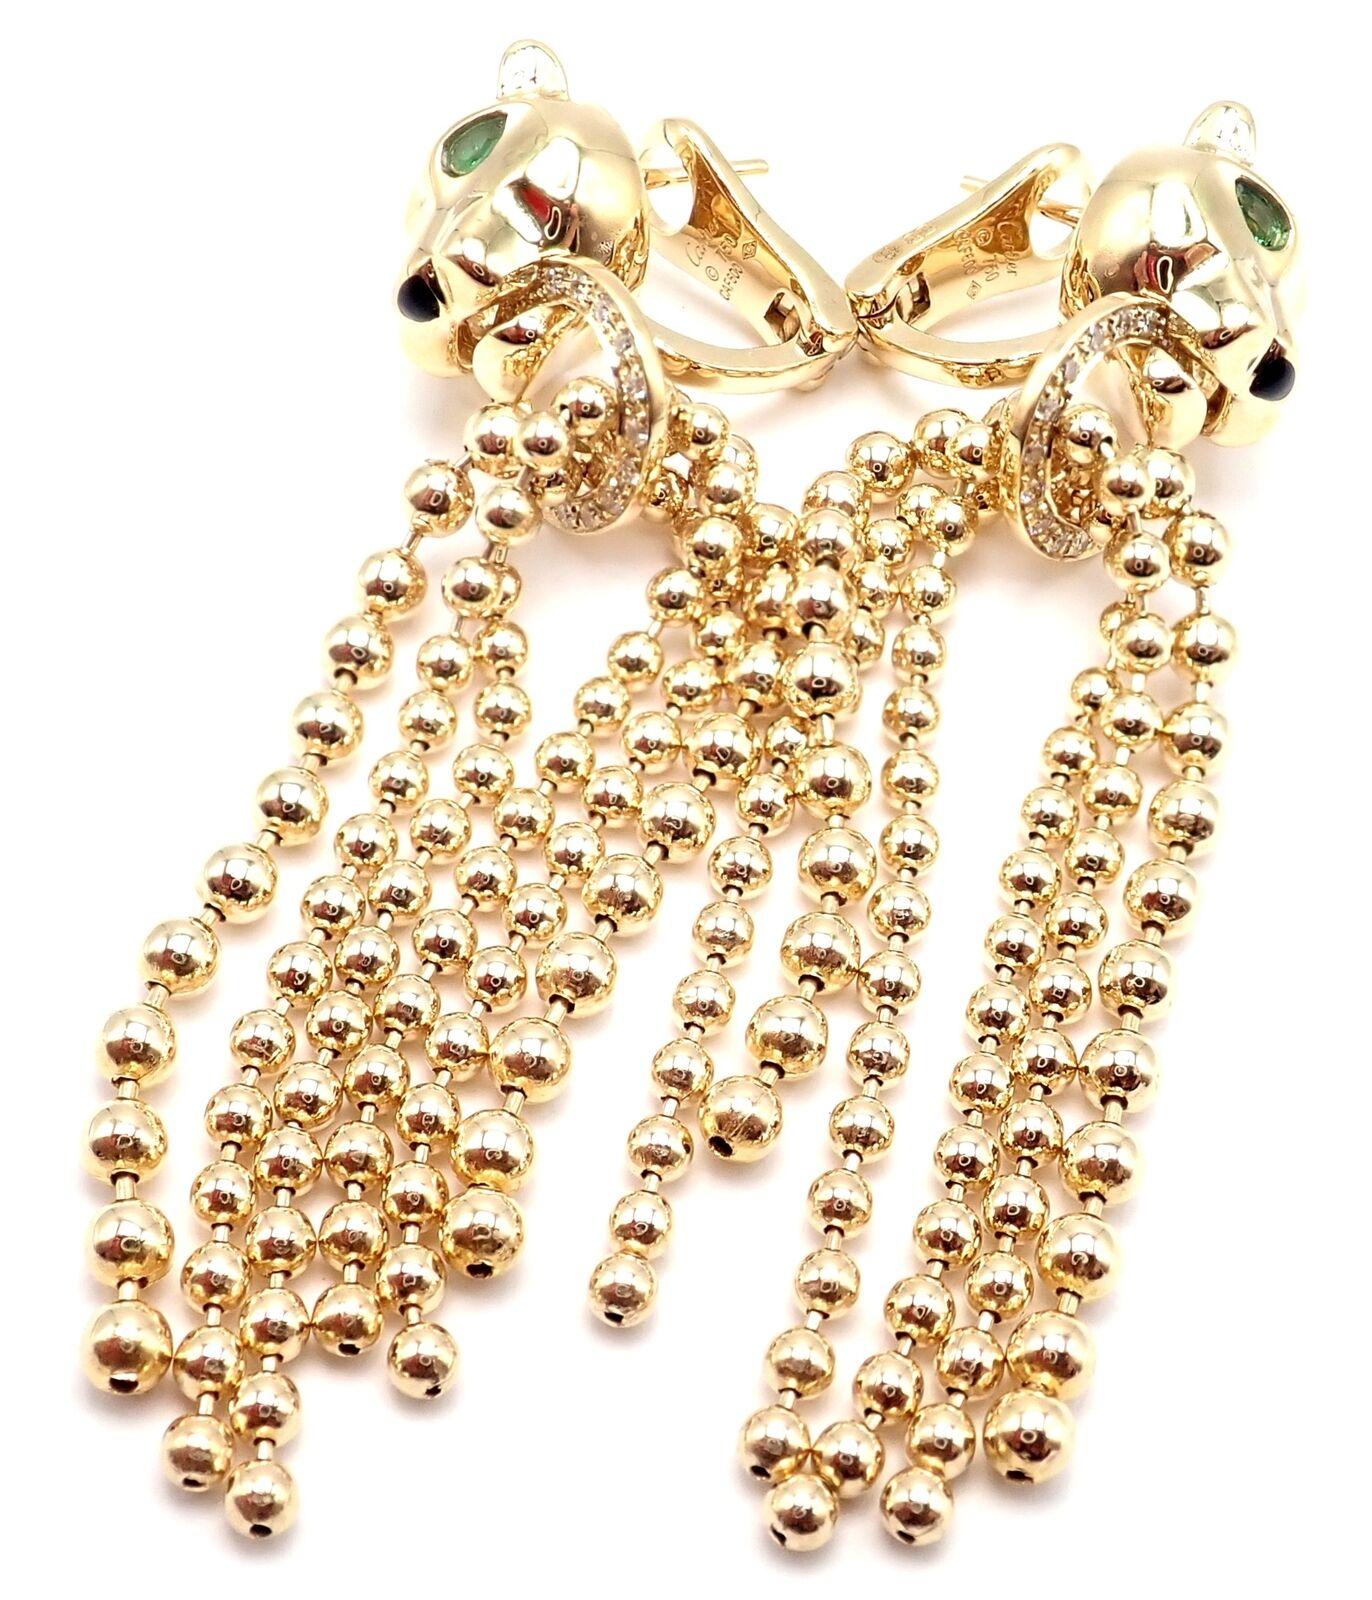 Cartier Panther Panthere Diamond Tsavorite Garnet Yellow Gold Earrings In Excellent Condition For Sale In Holland, PA